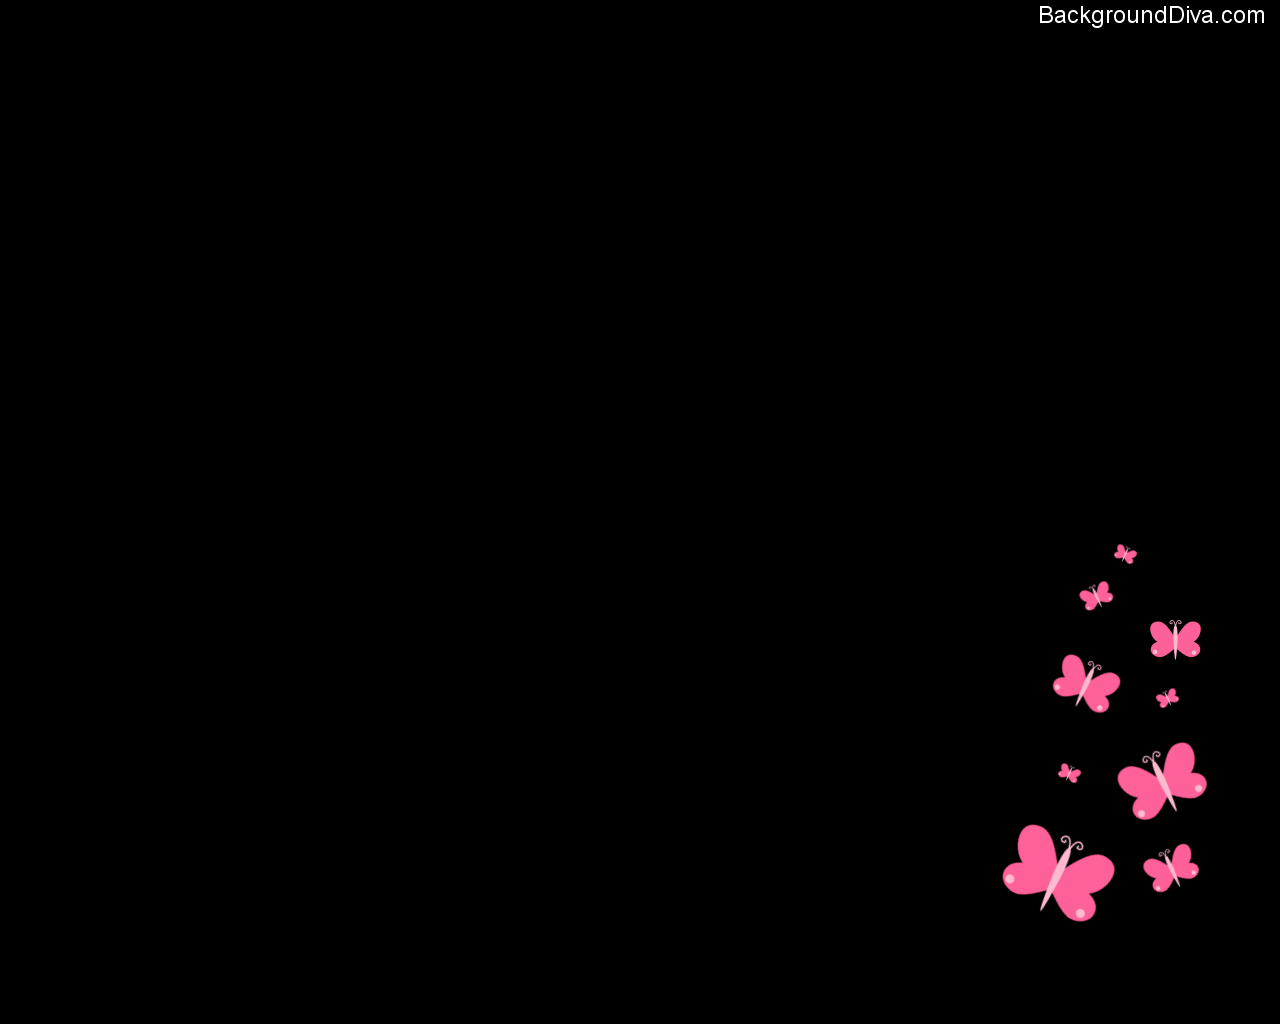 Wallpaper For > Cute Pink And Black Background